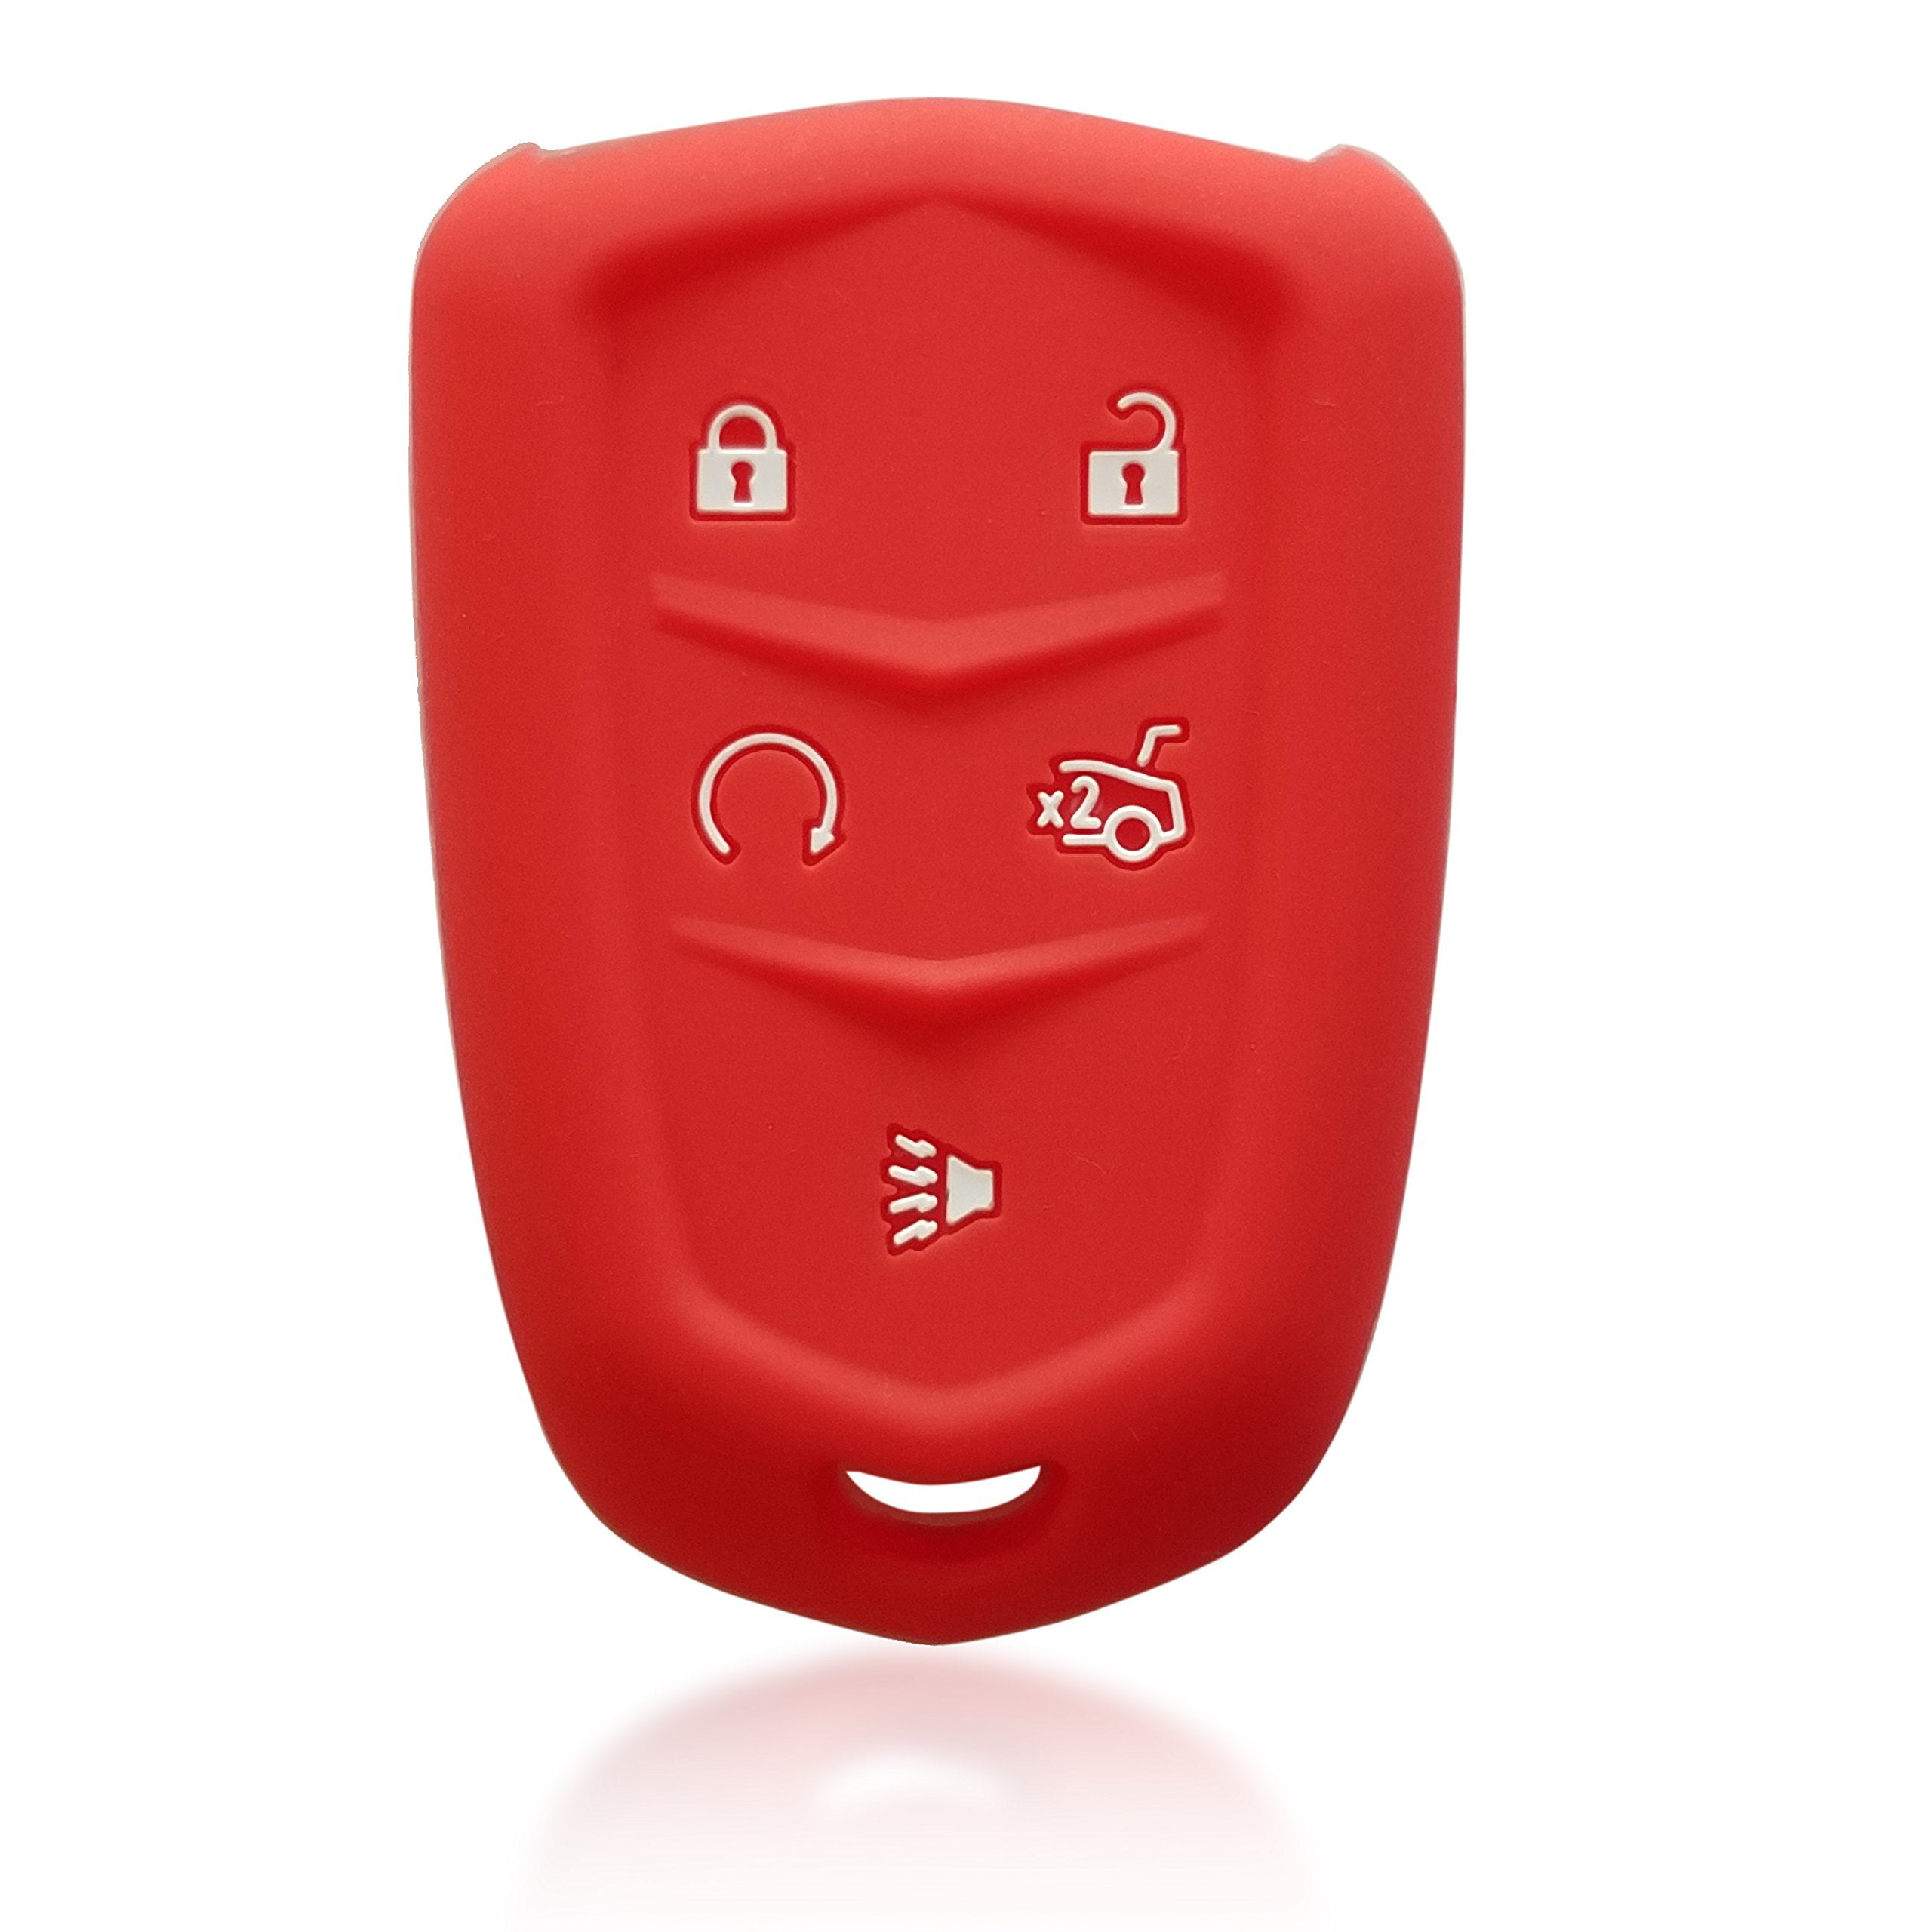 Silicone Skin Cover fit for CADILLAC Smart Remote Key Case Fob Shell 5B 4770 PU 